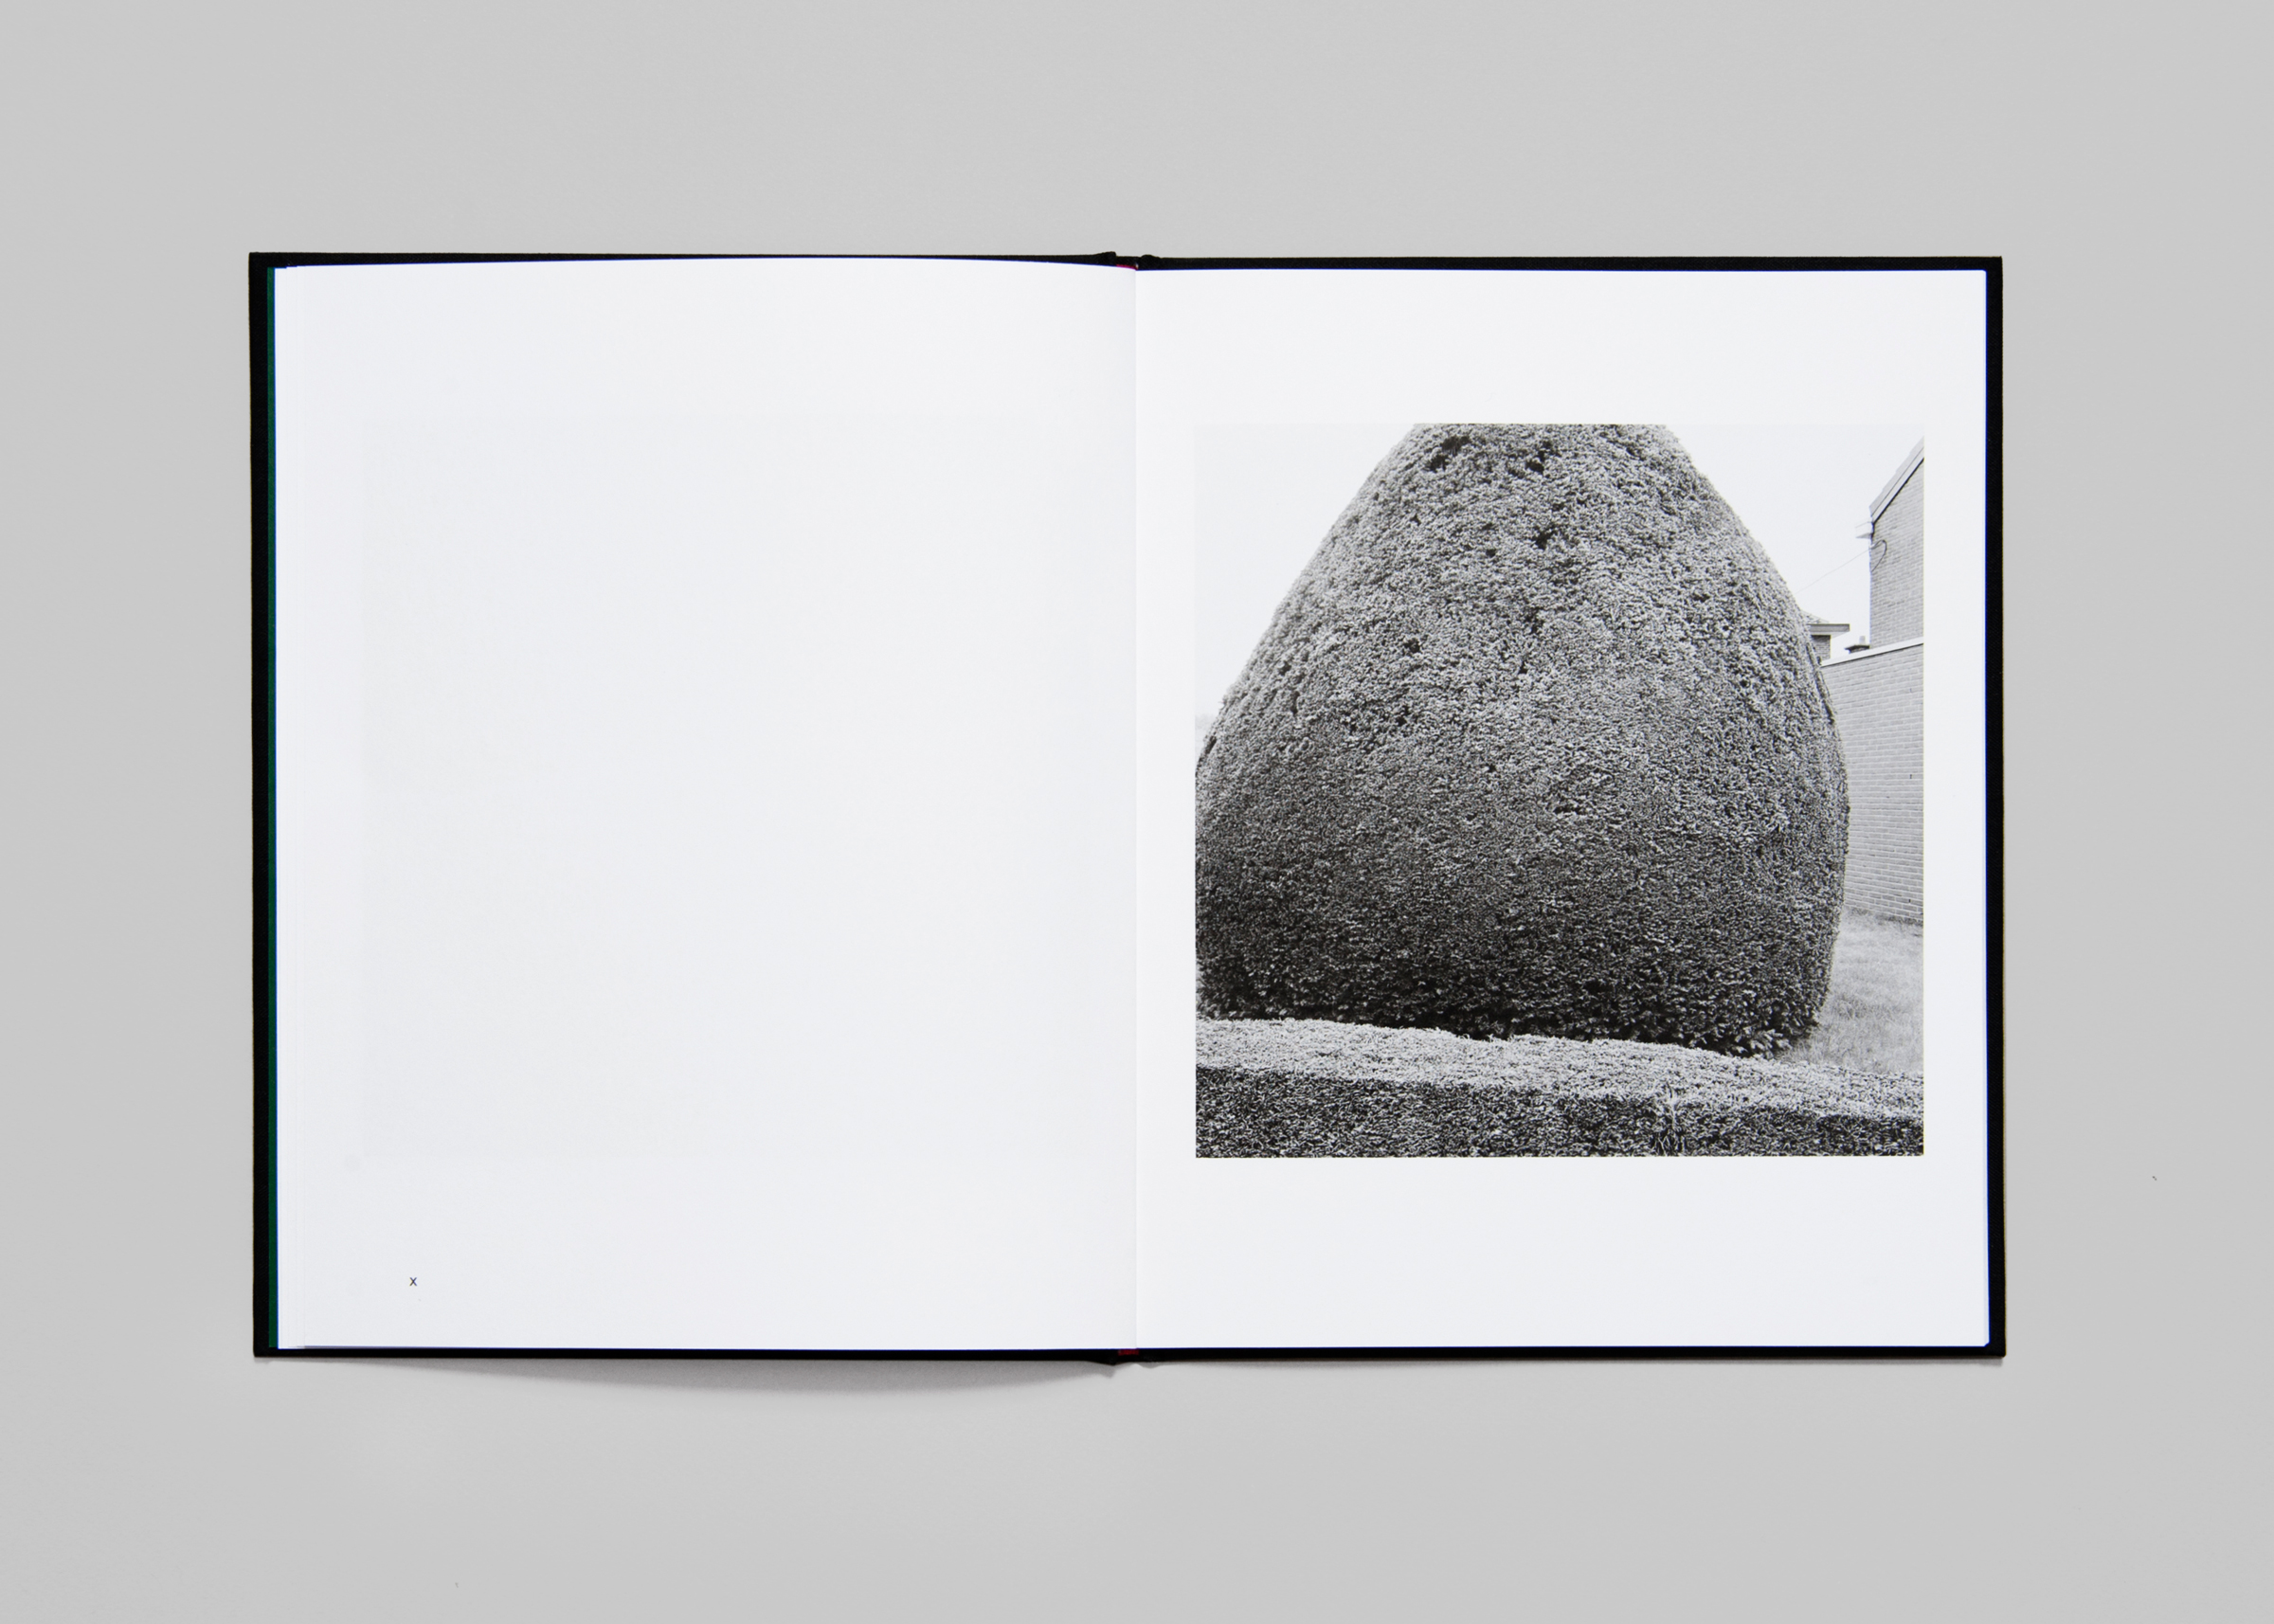 Dieter Daemen — No Place Like Home — Book